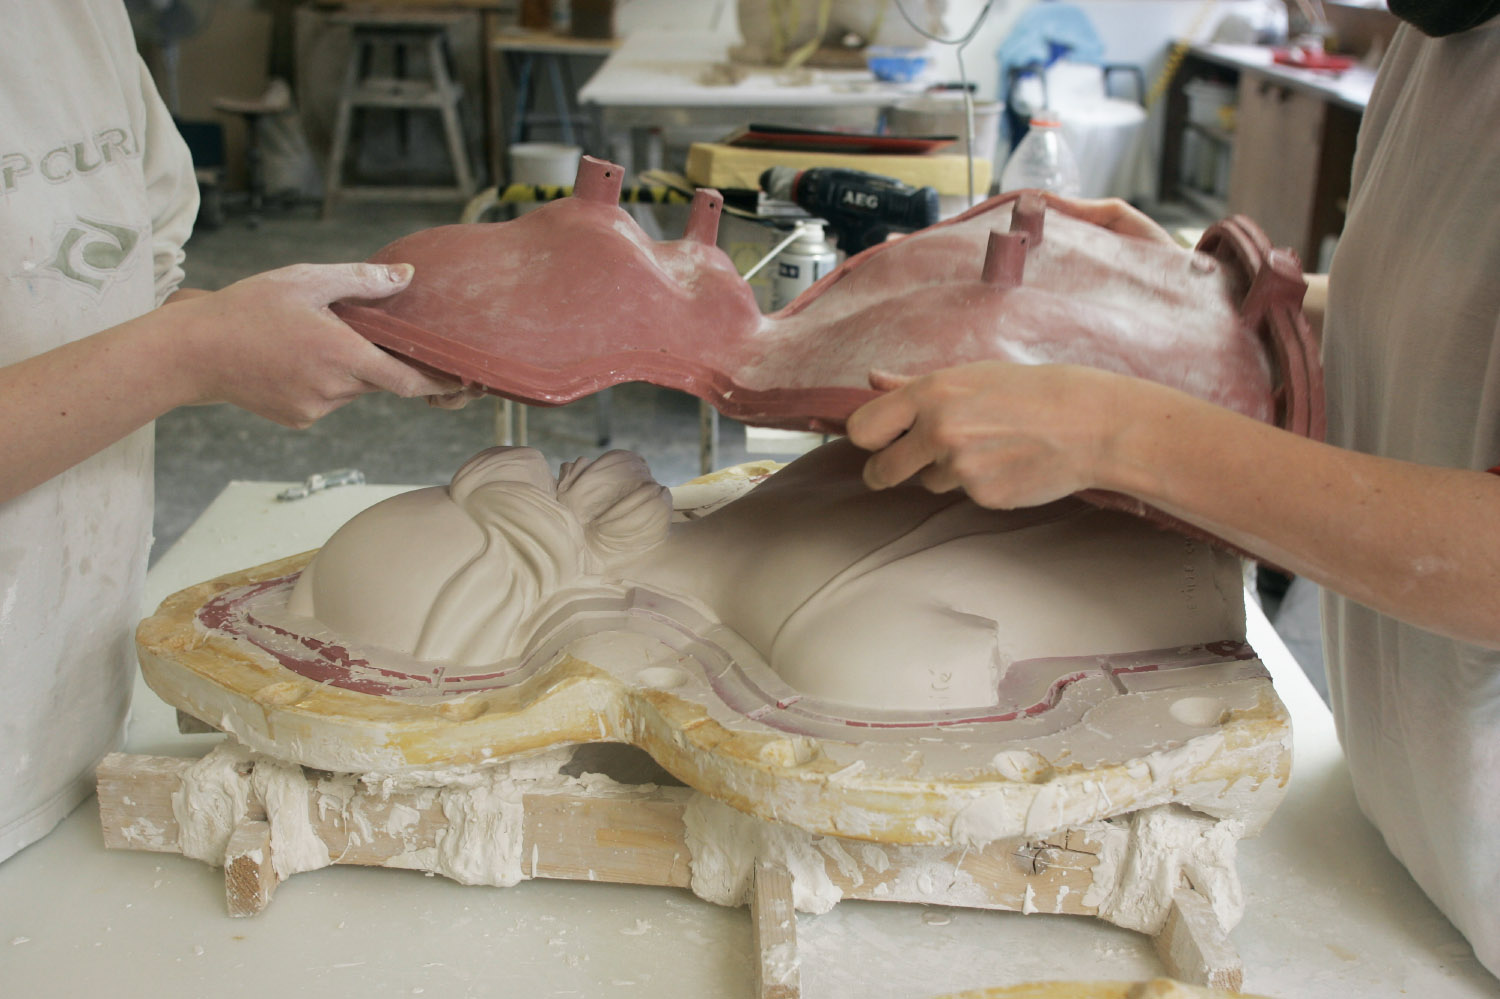 From producing a silicone mold to casting in resin, plaster or bronze, the cast workshop techniques - The casting process - Unmolding